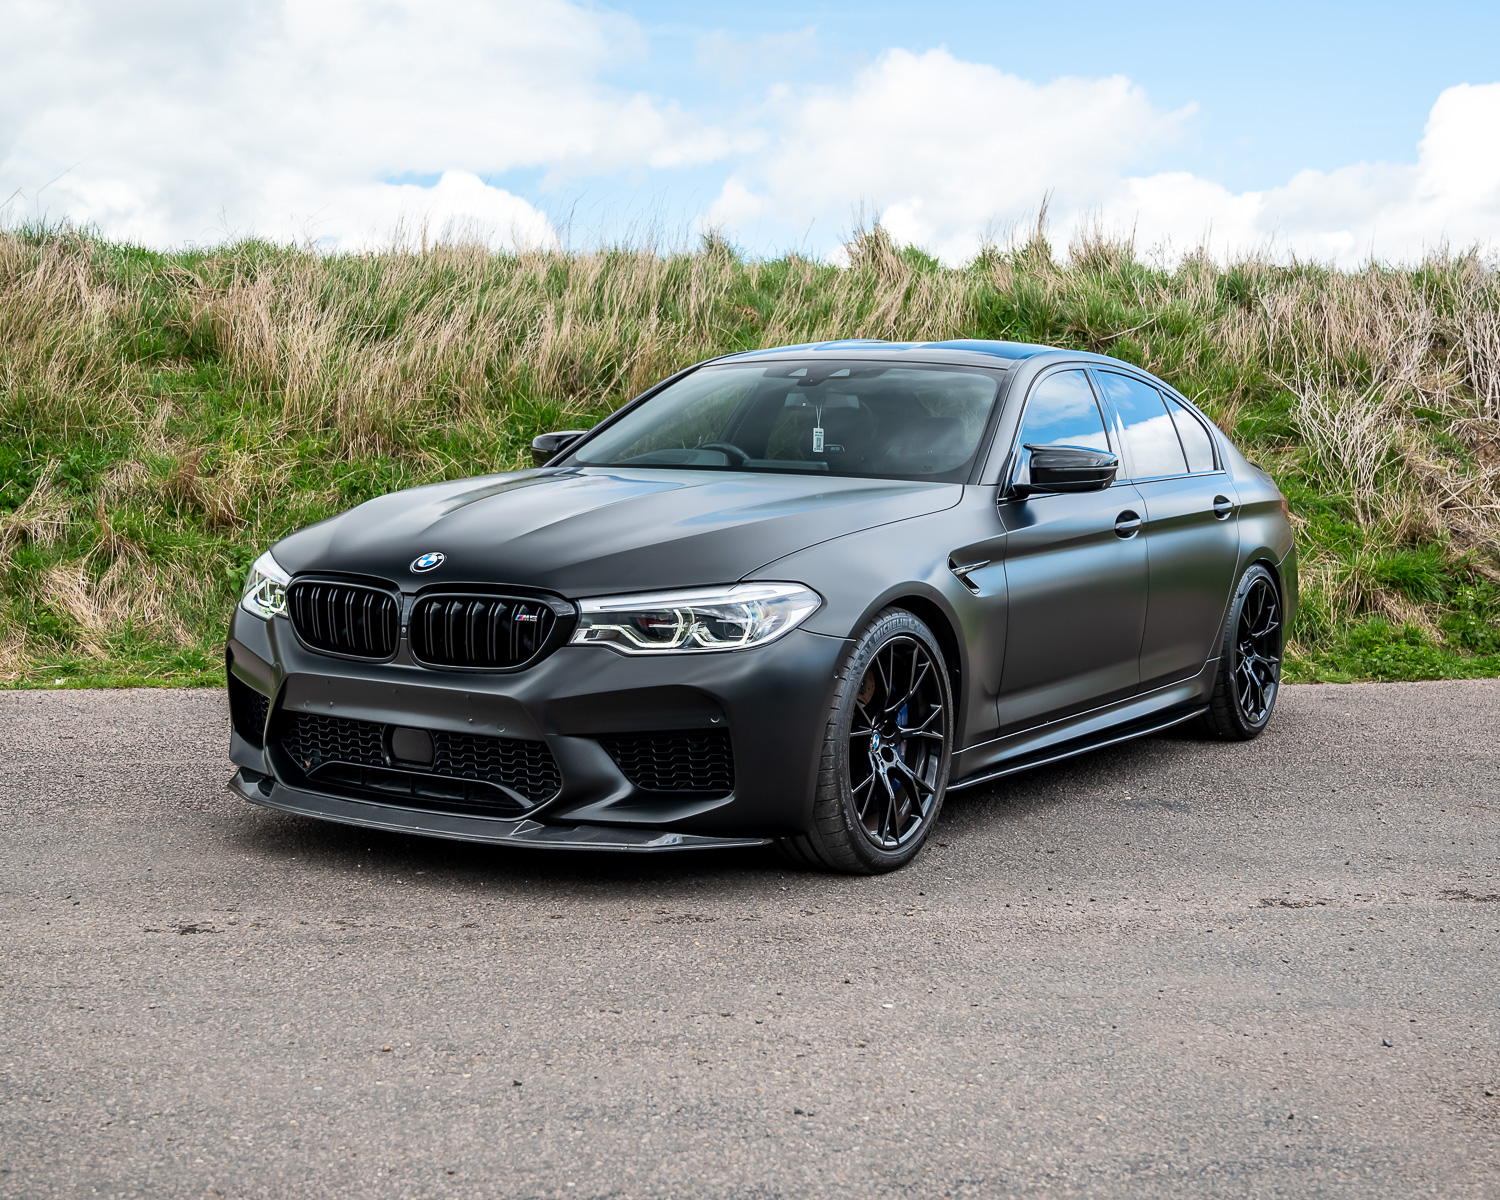 WIN THIS BMW M5 COMPETITION + £1,000 CASH